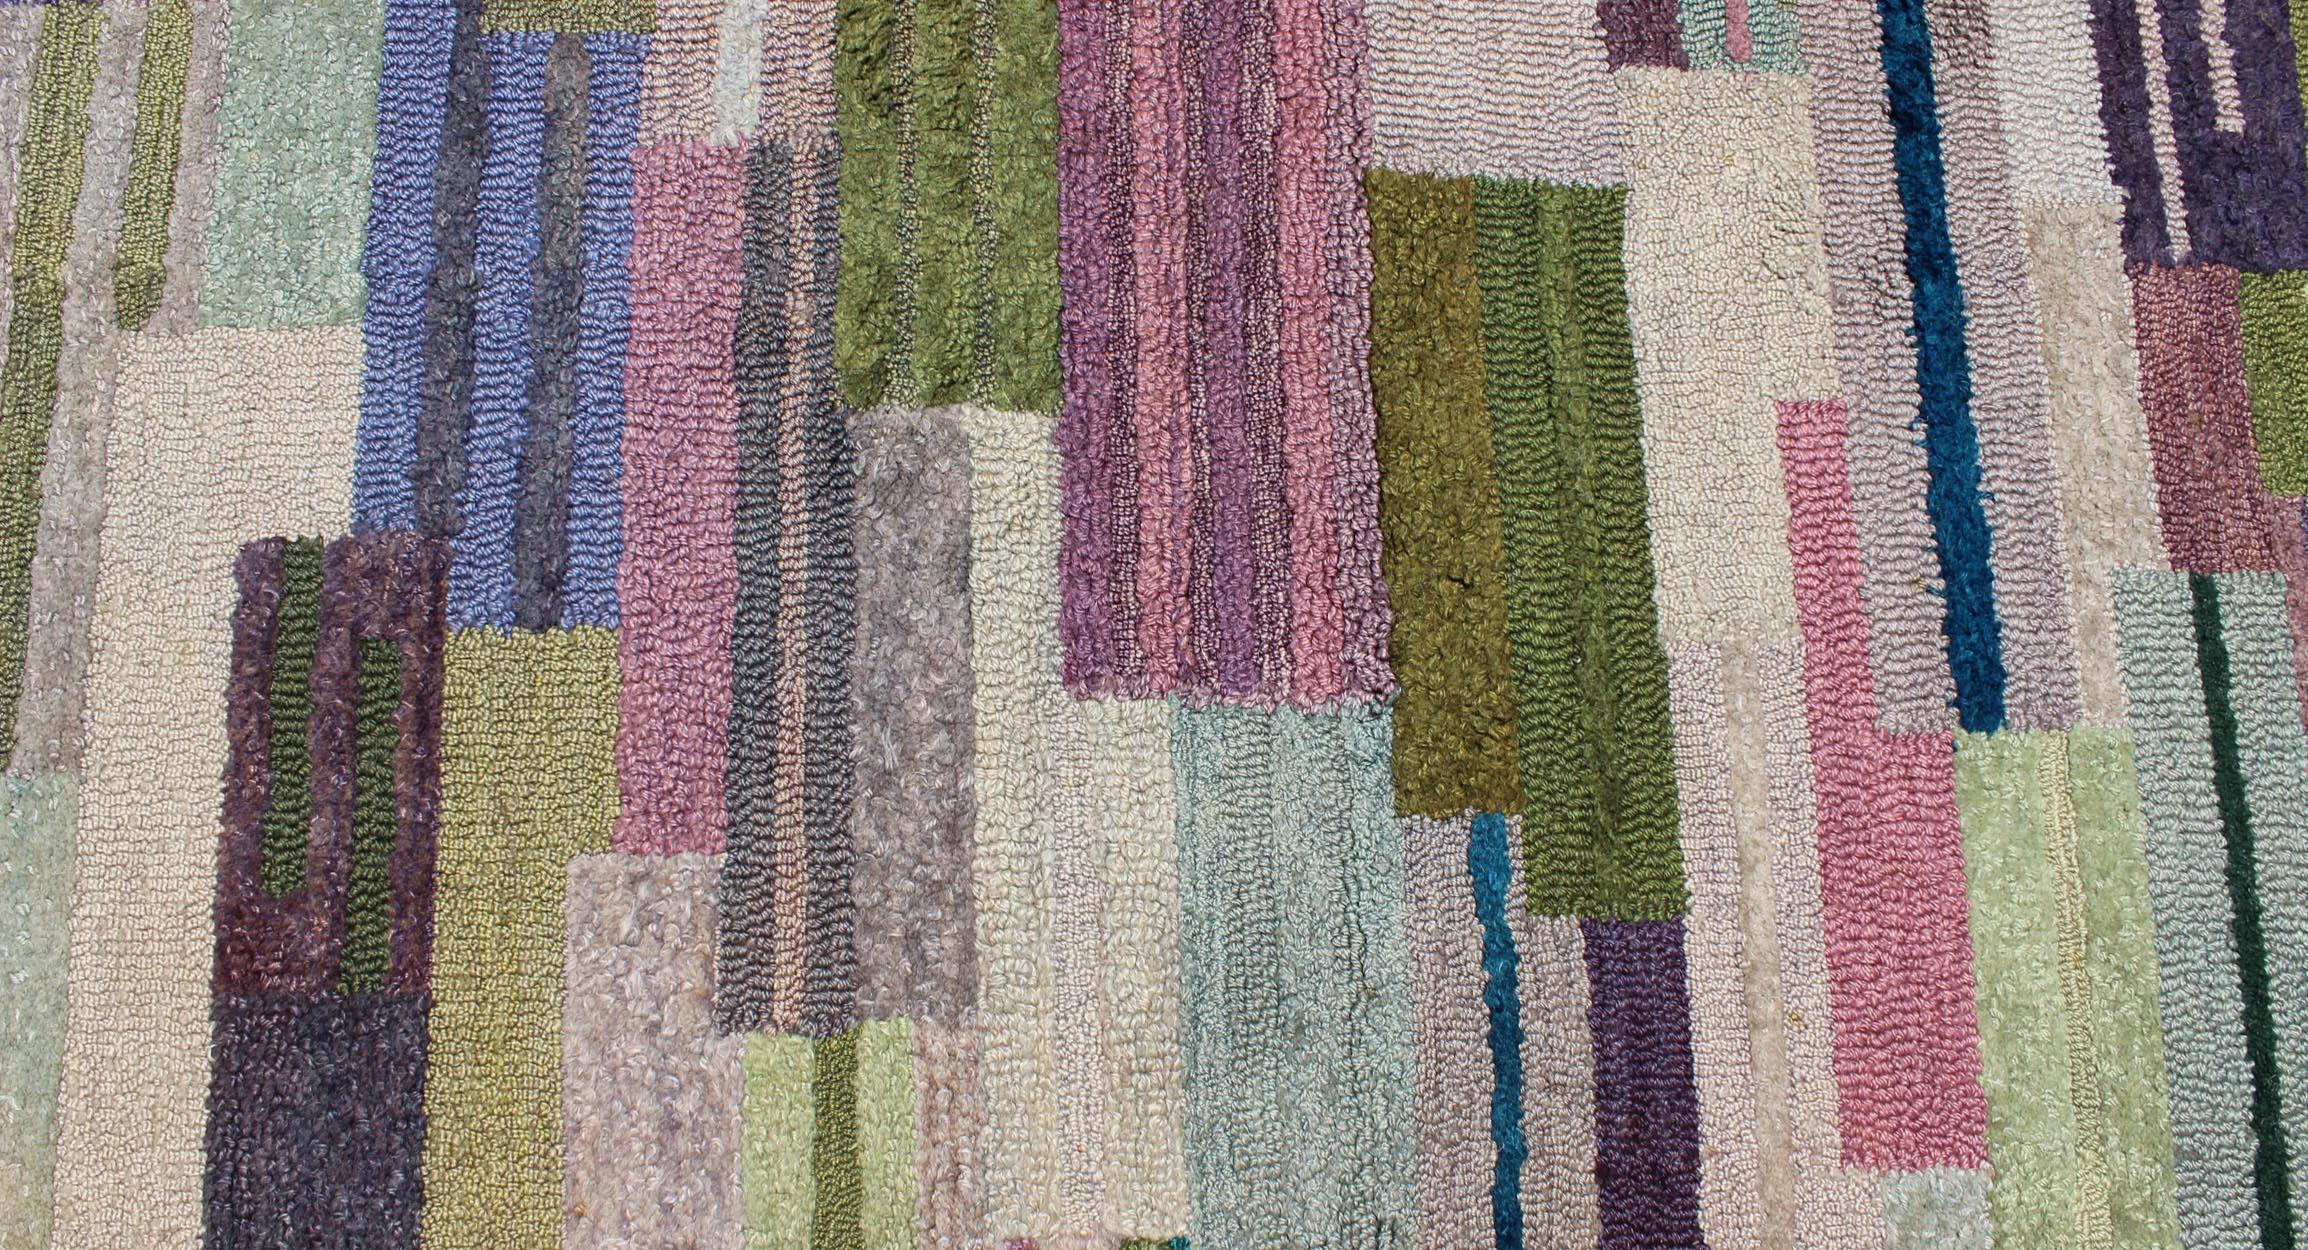 American Craftsman Large American Hooked Rug by George Wells with a Modern Design and Modern Colors For Sale